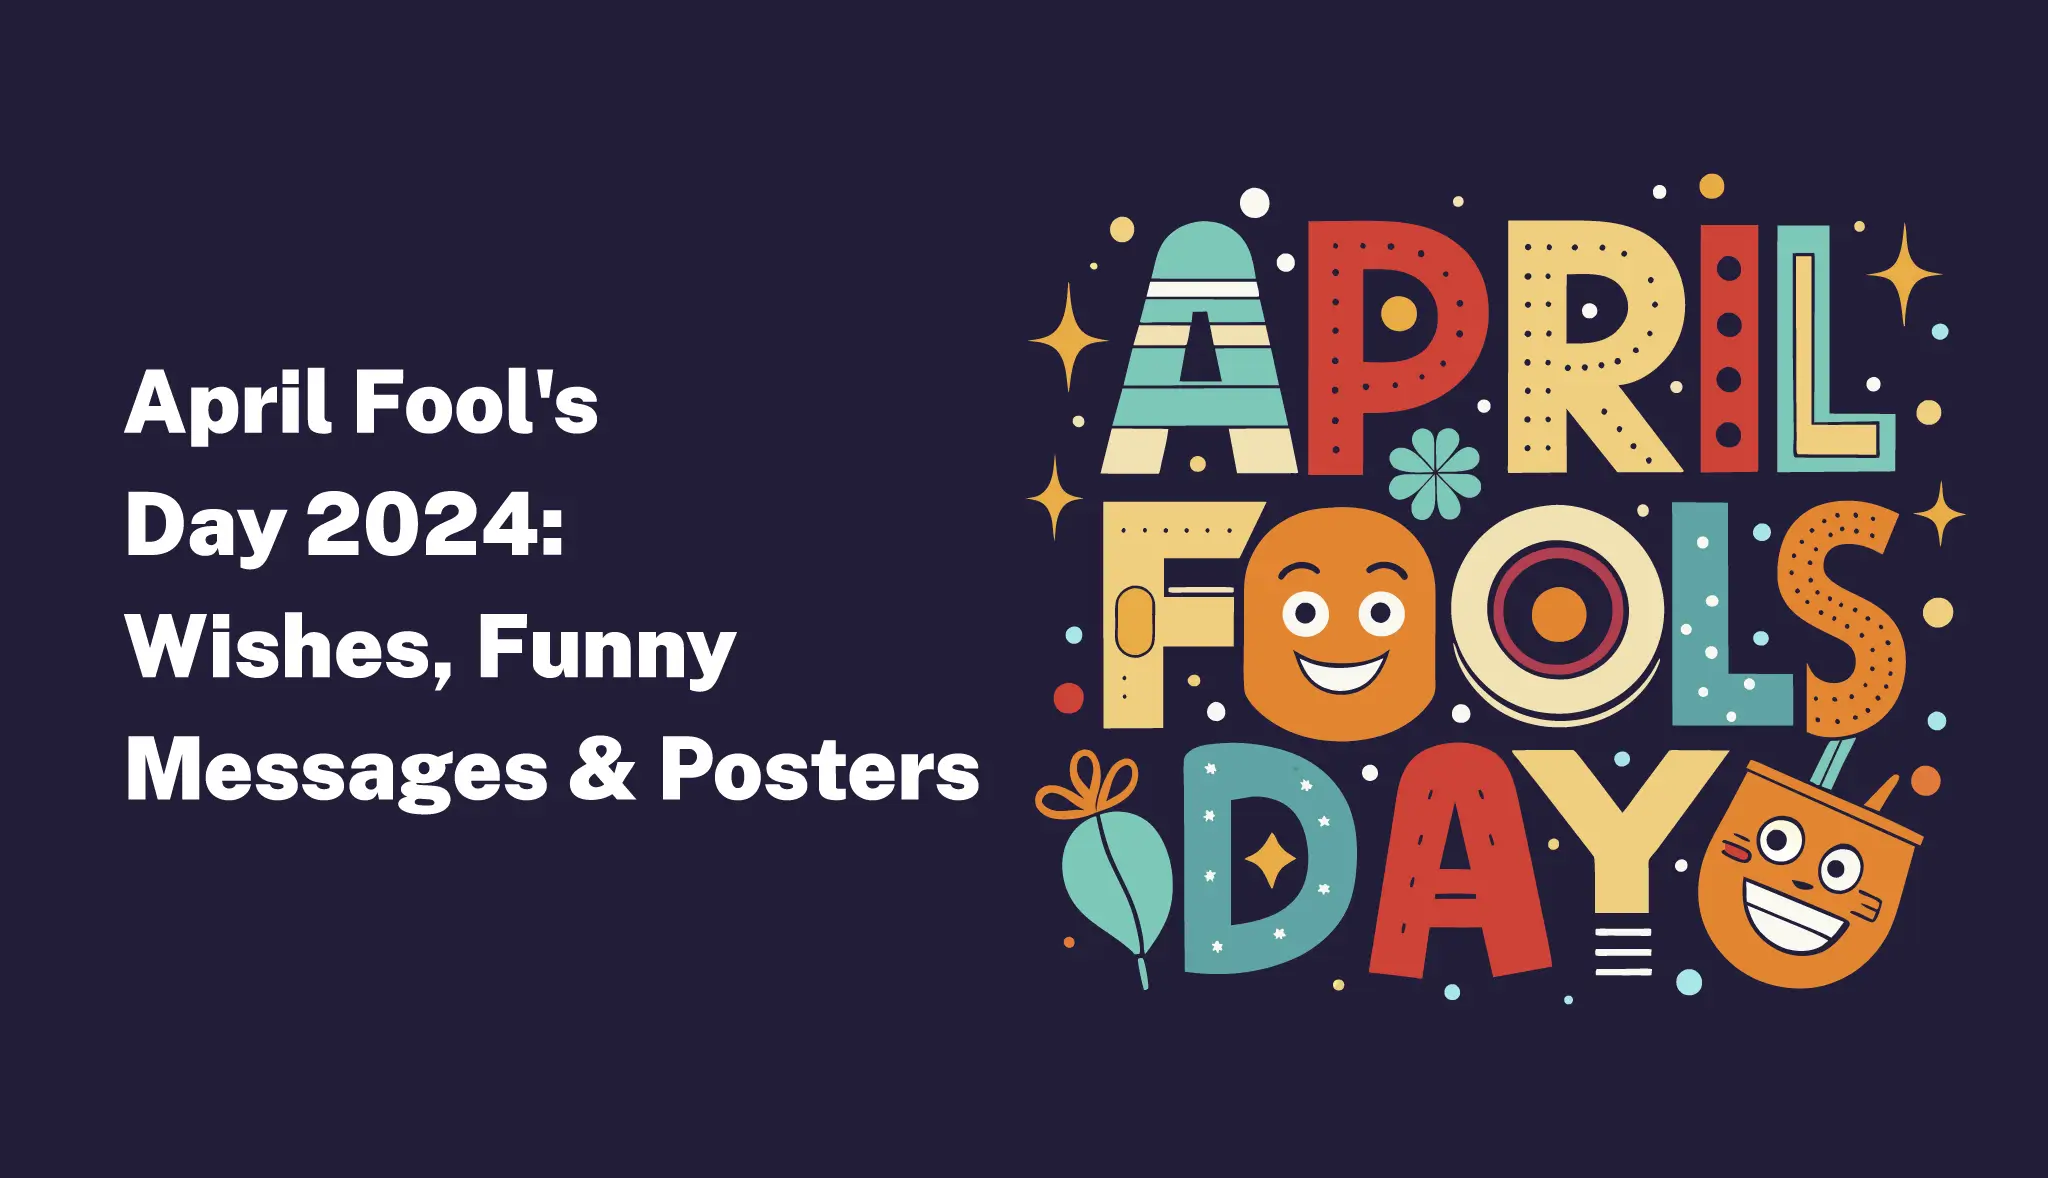 April Fool's Day 2024: Wishes, Funny Messages & Posters - Postive